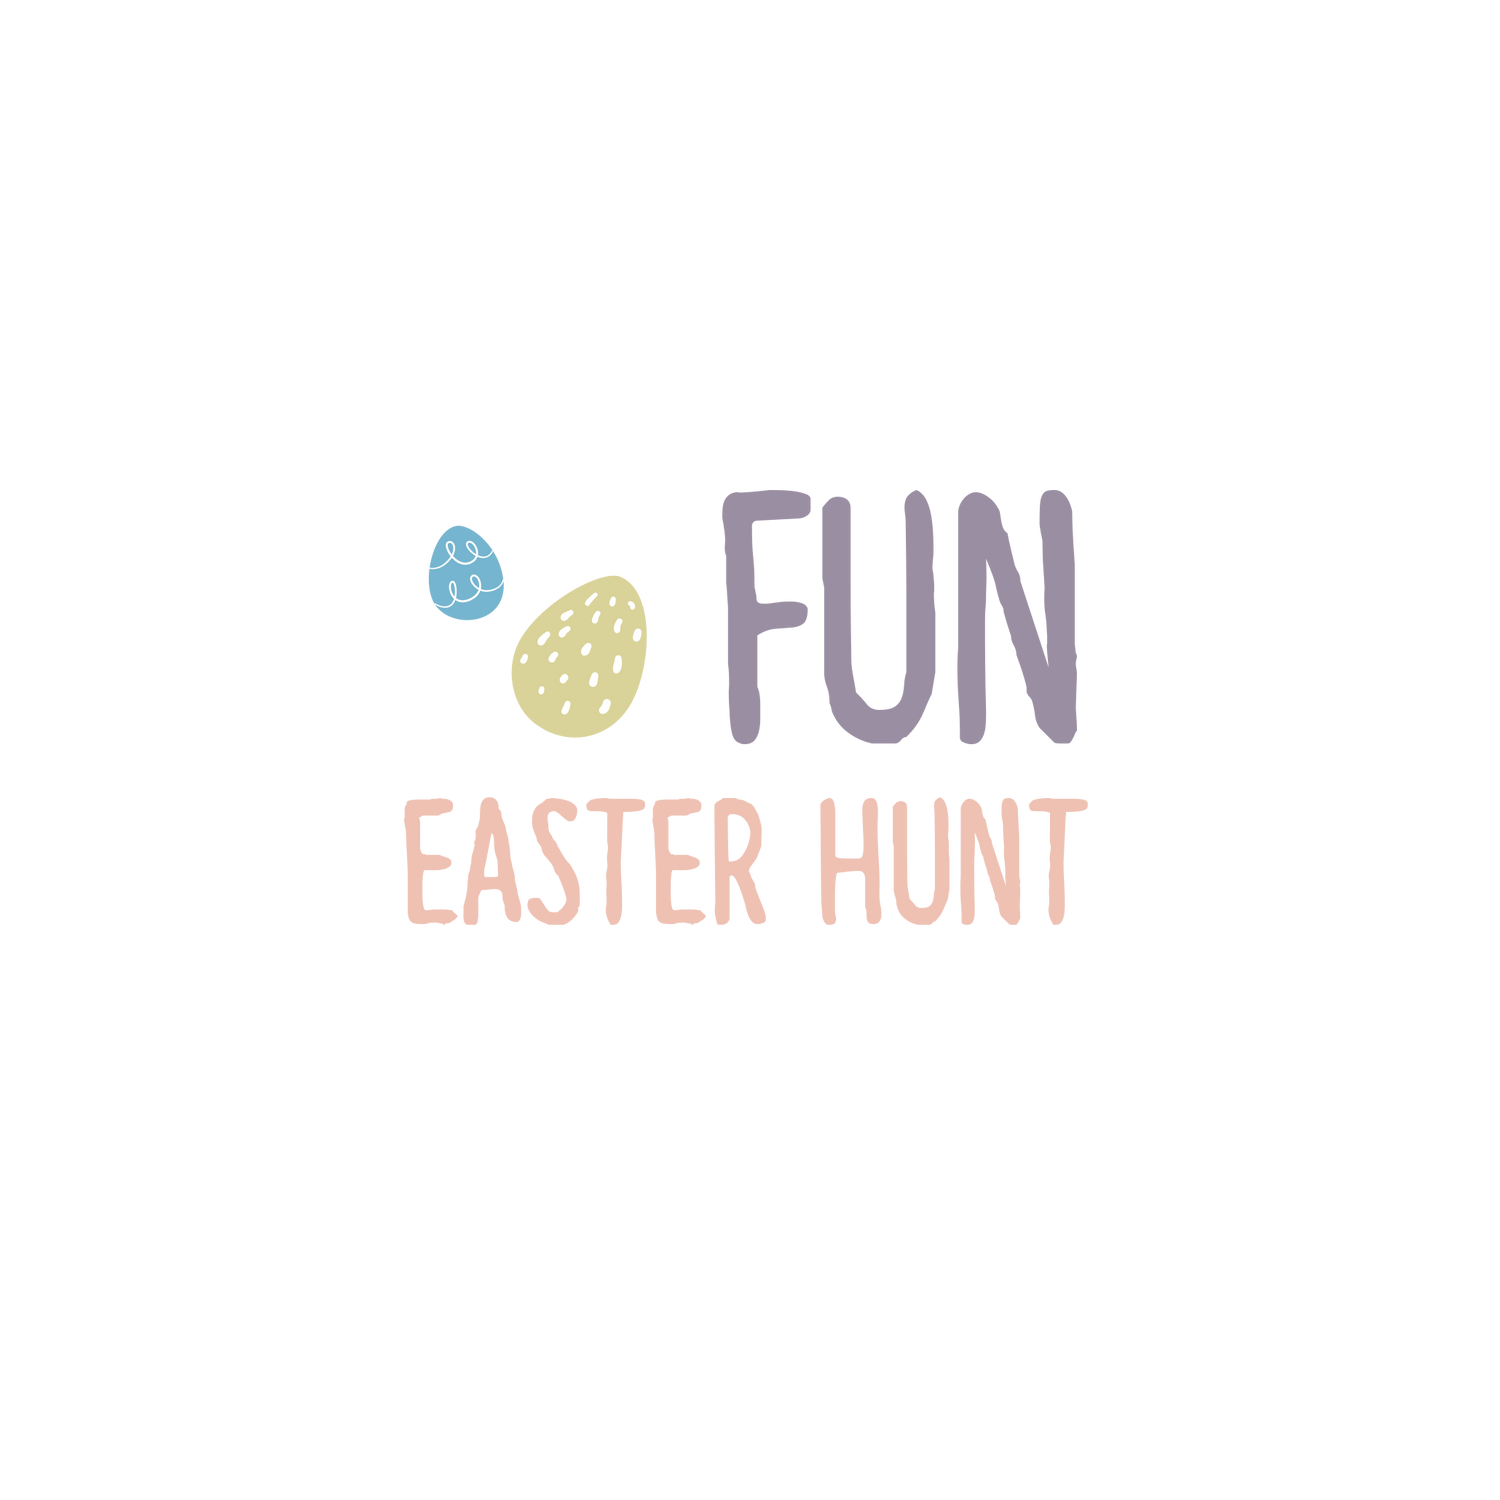 English version of the logo of the fun easter hunt document made by Les Belles Combines